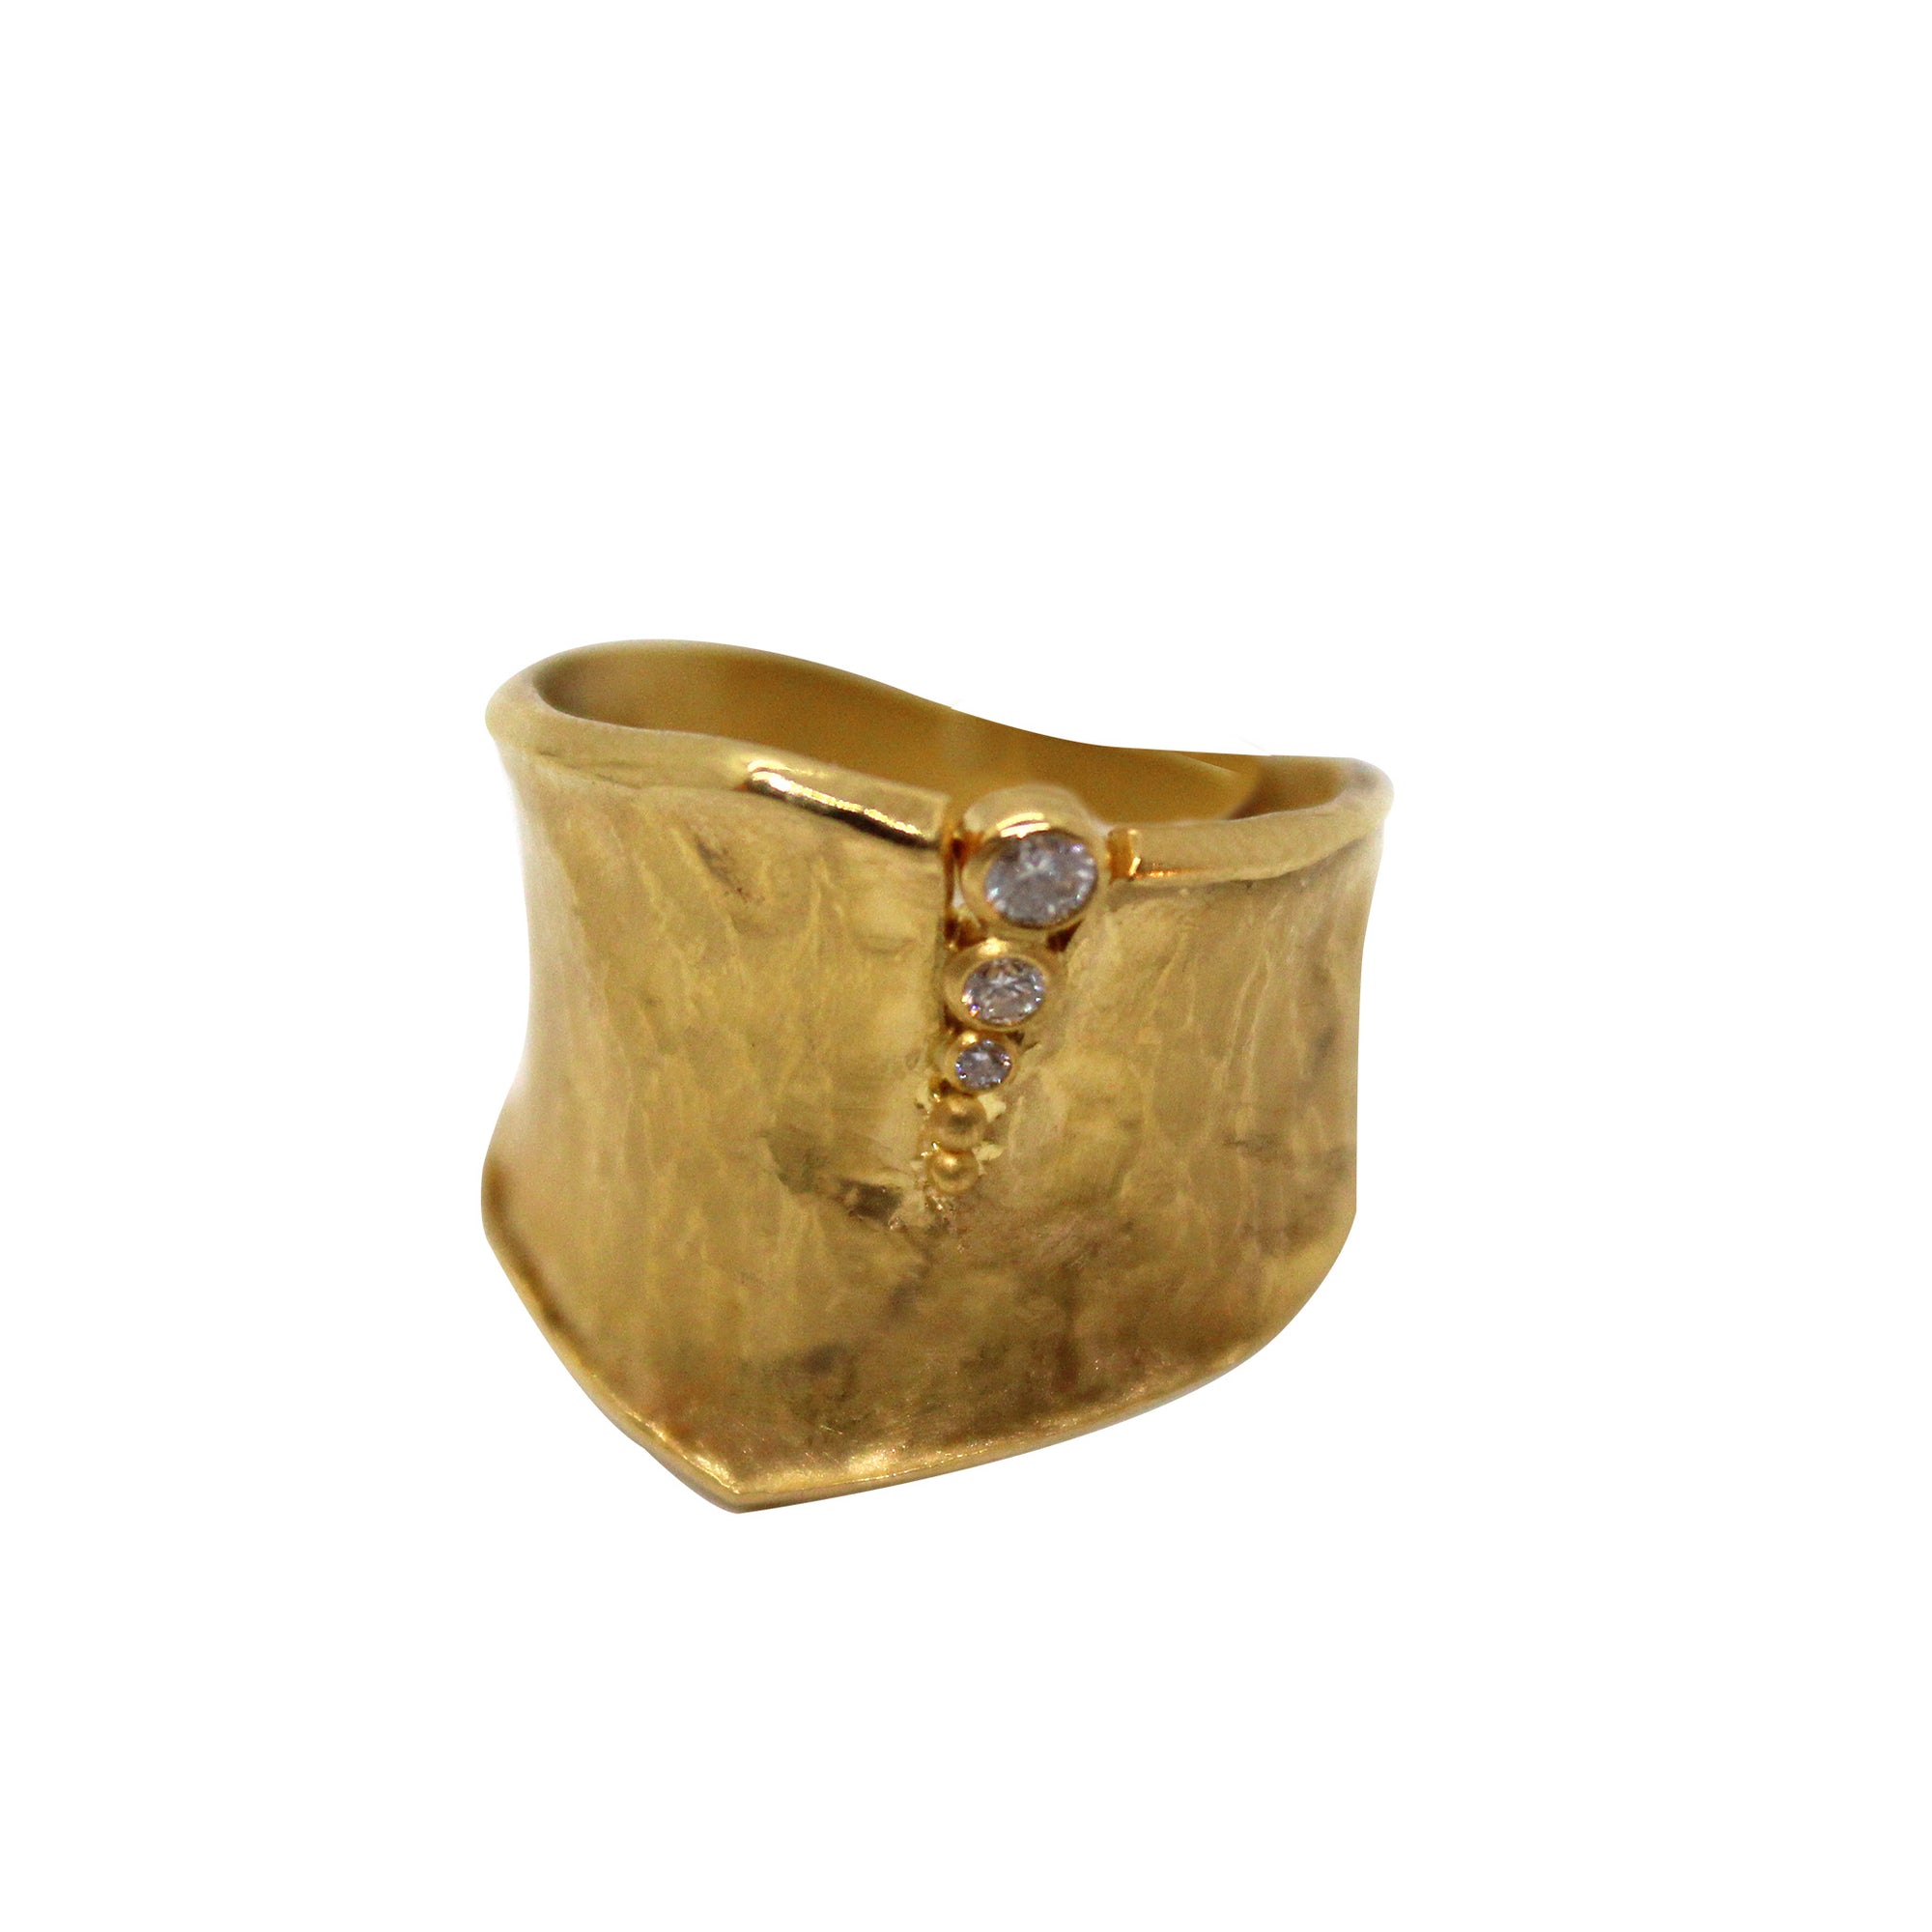 Cleaved Diamond + Gold Ring